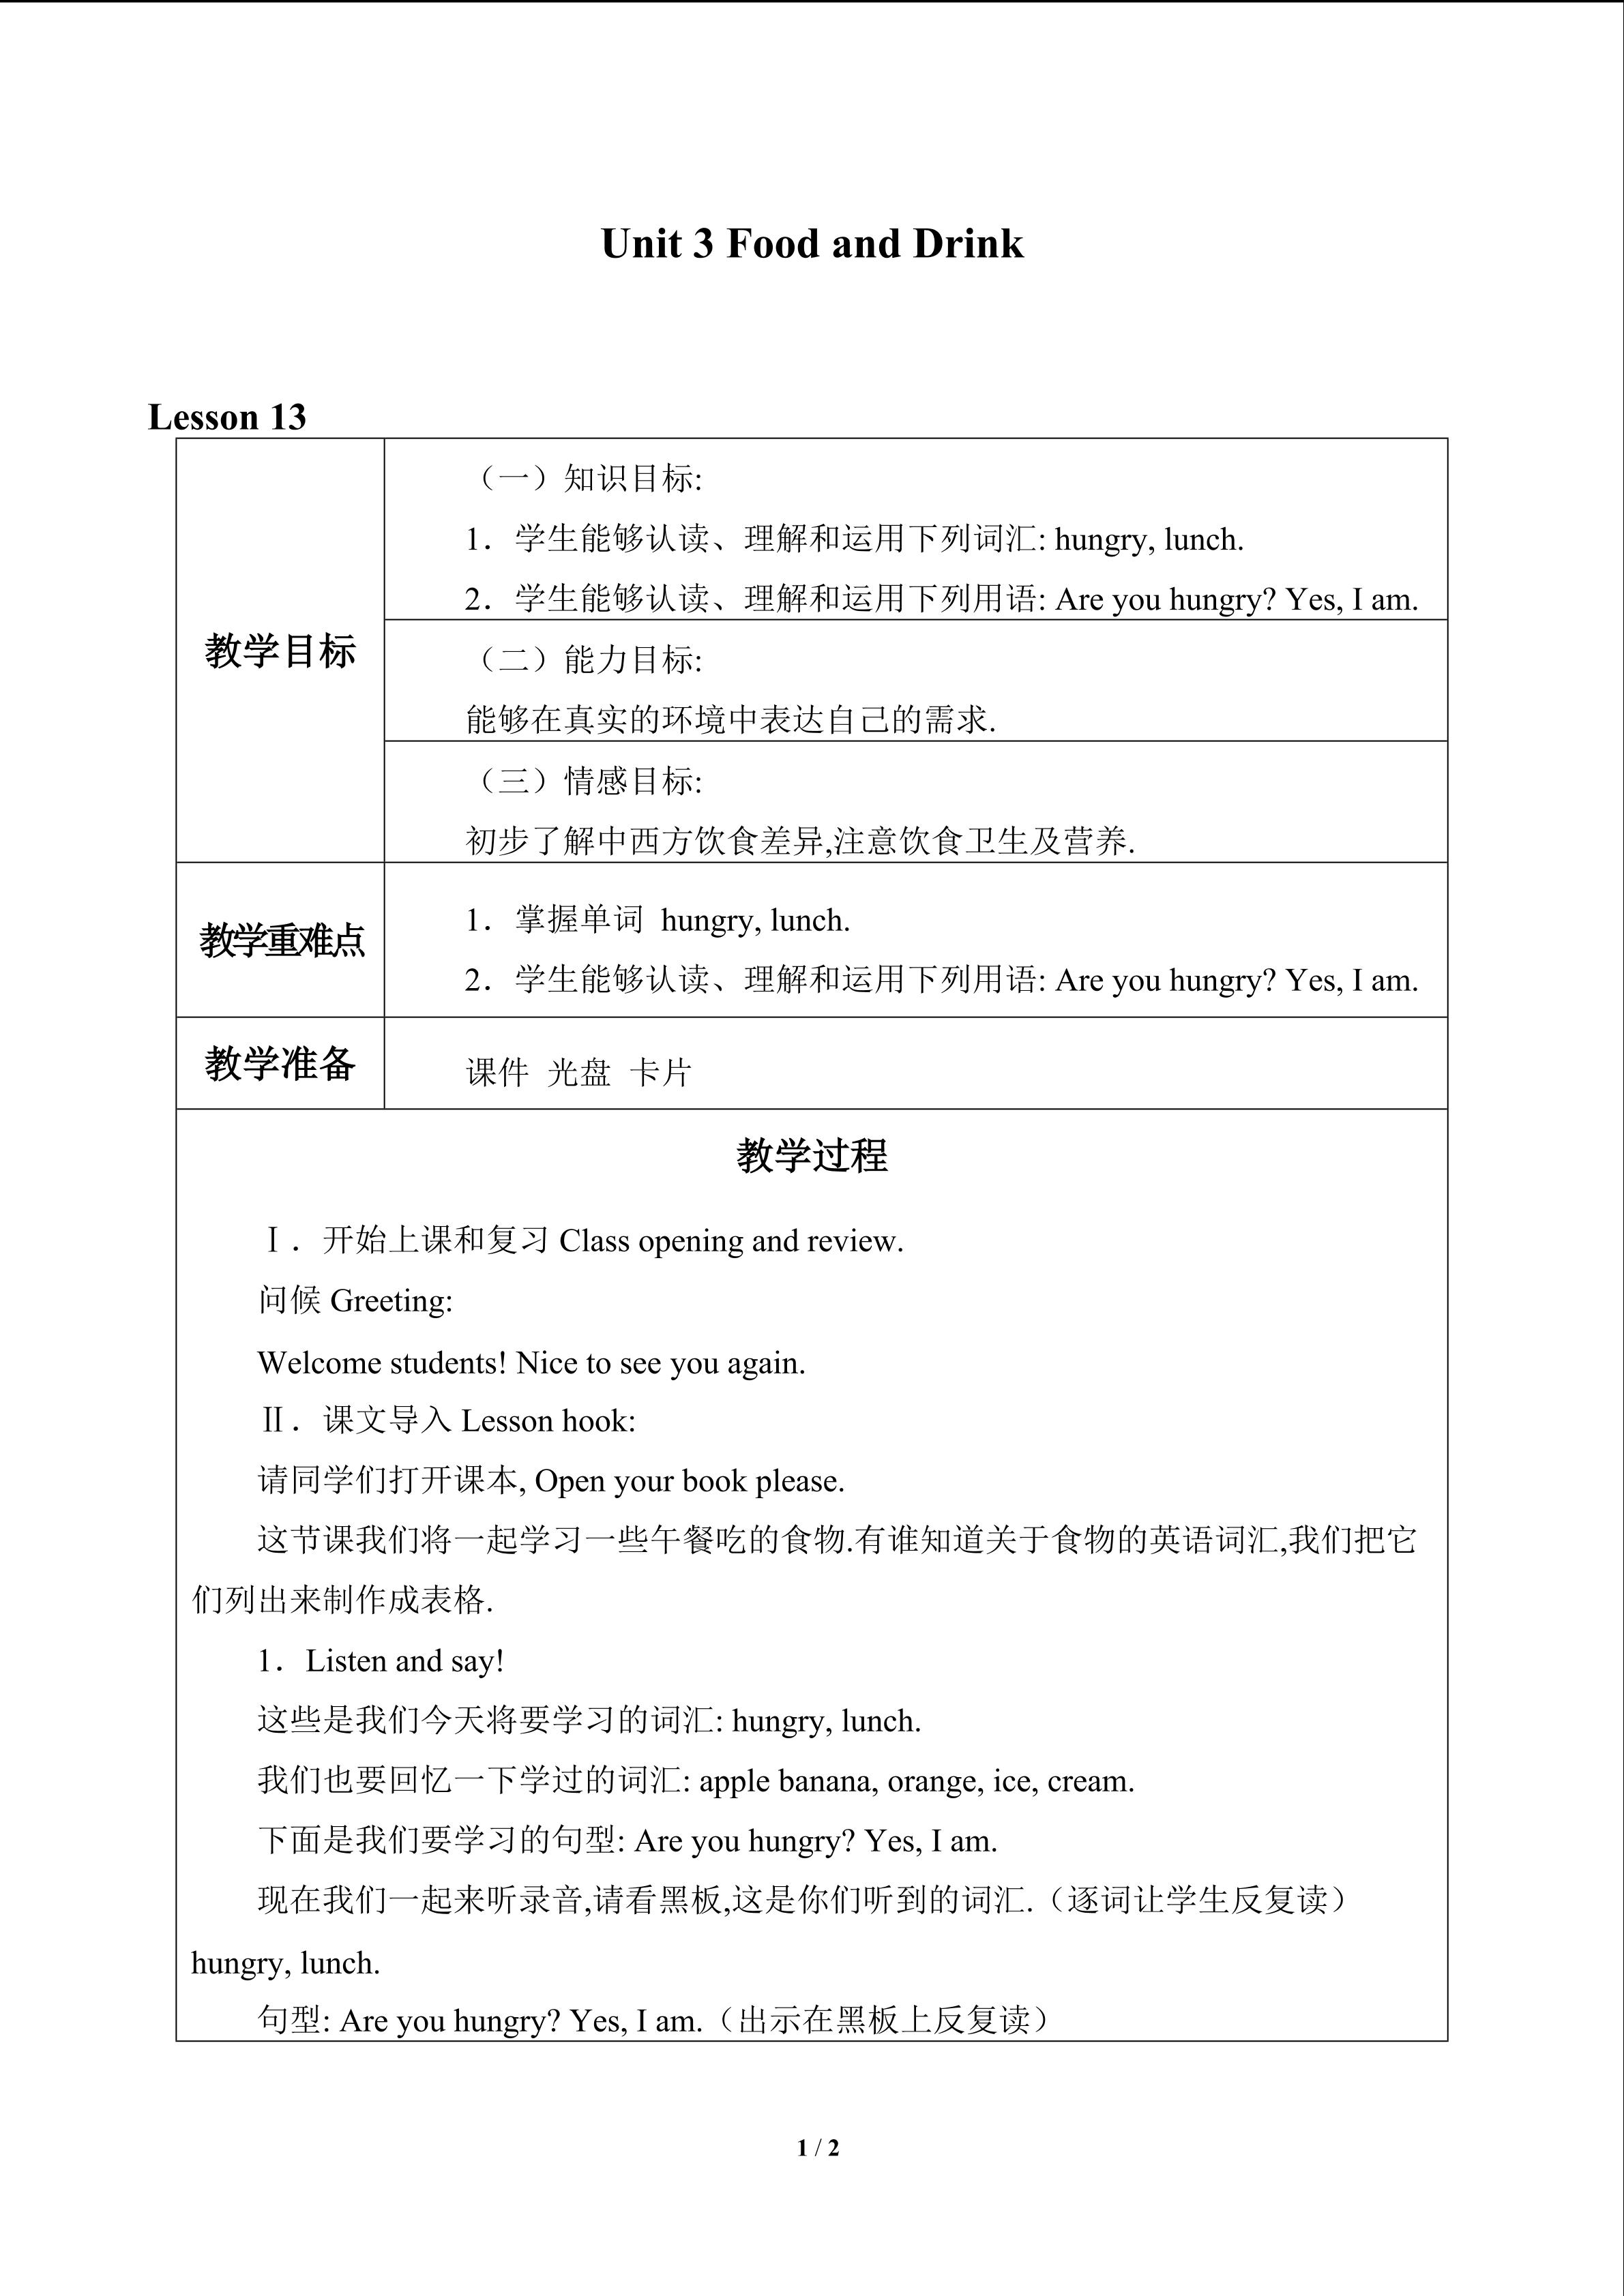 Unit 3 Food and Drink_教案1